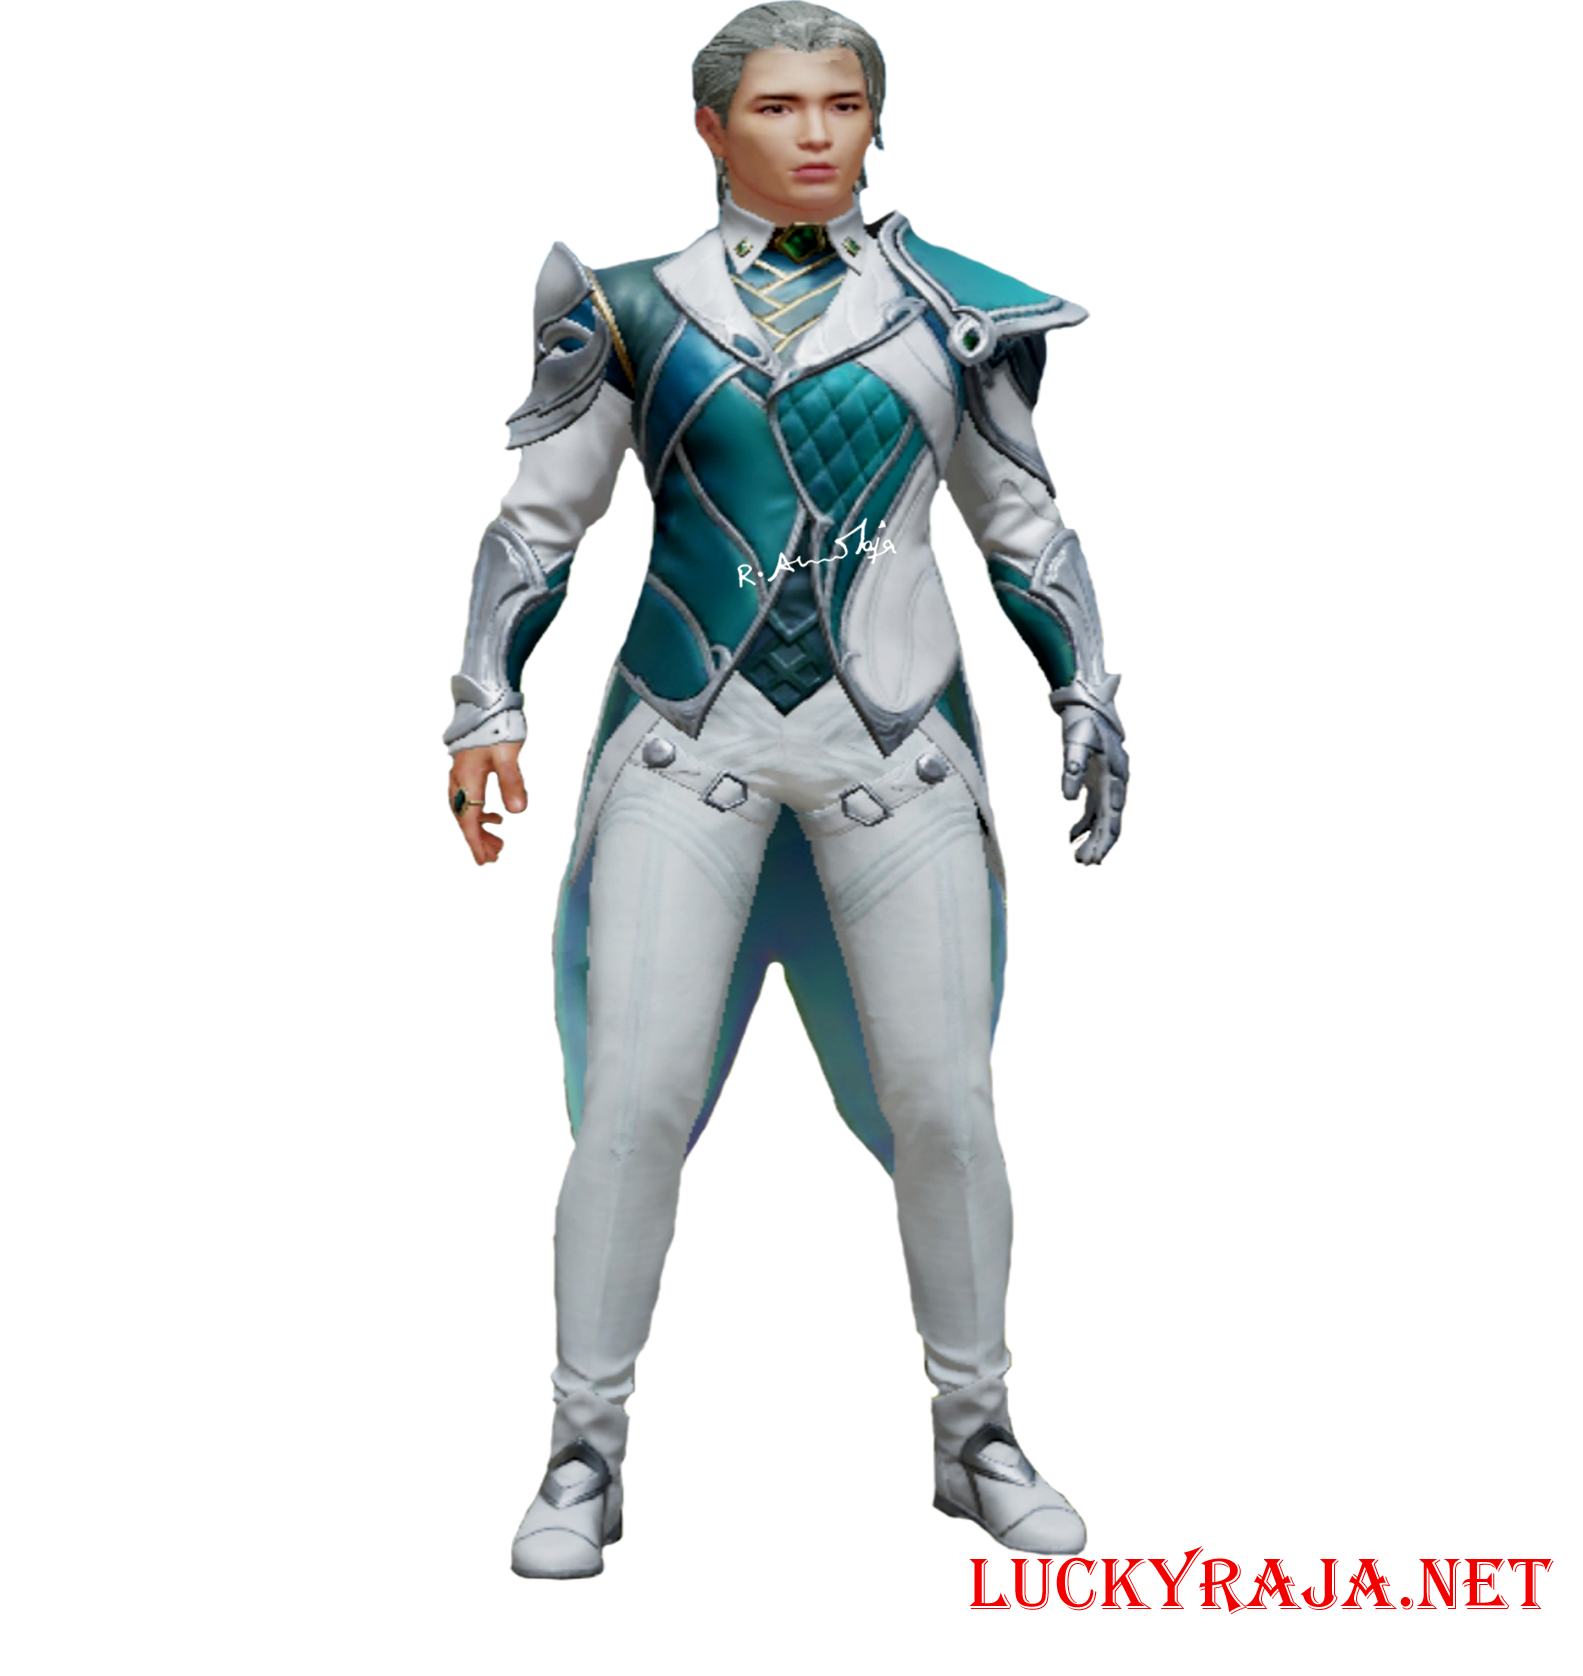 Silvanus x suit,Silvanus x suit images,Silvanus x suit outfits